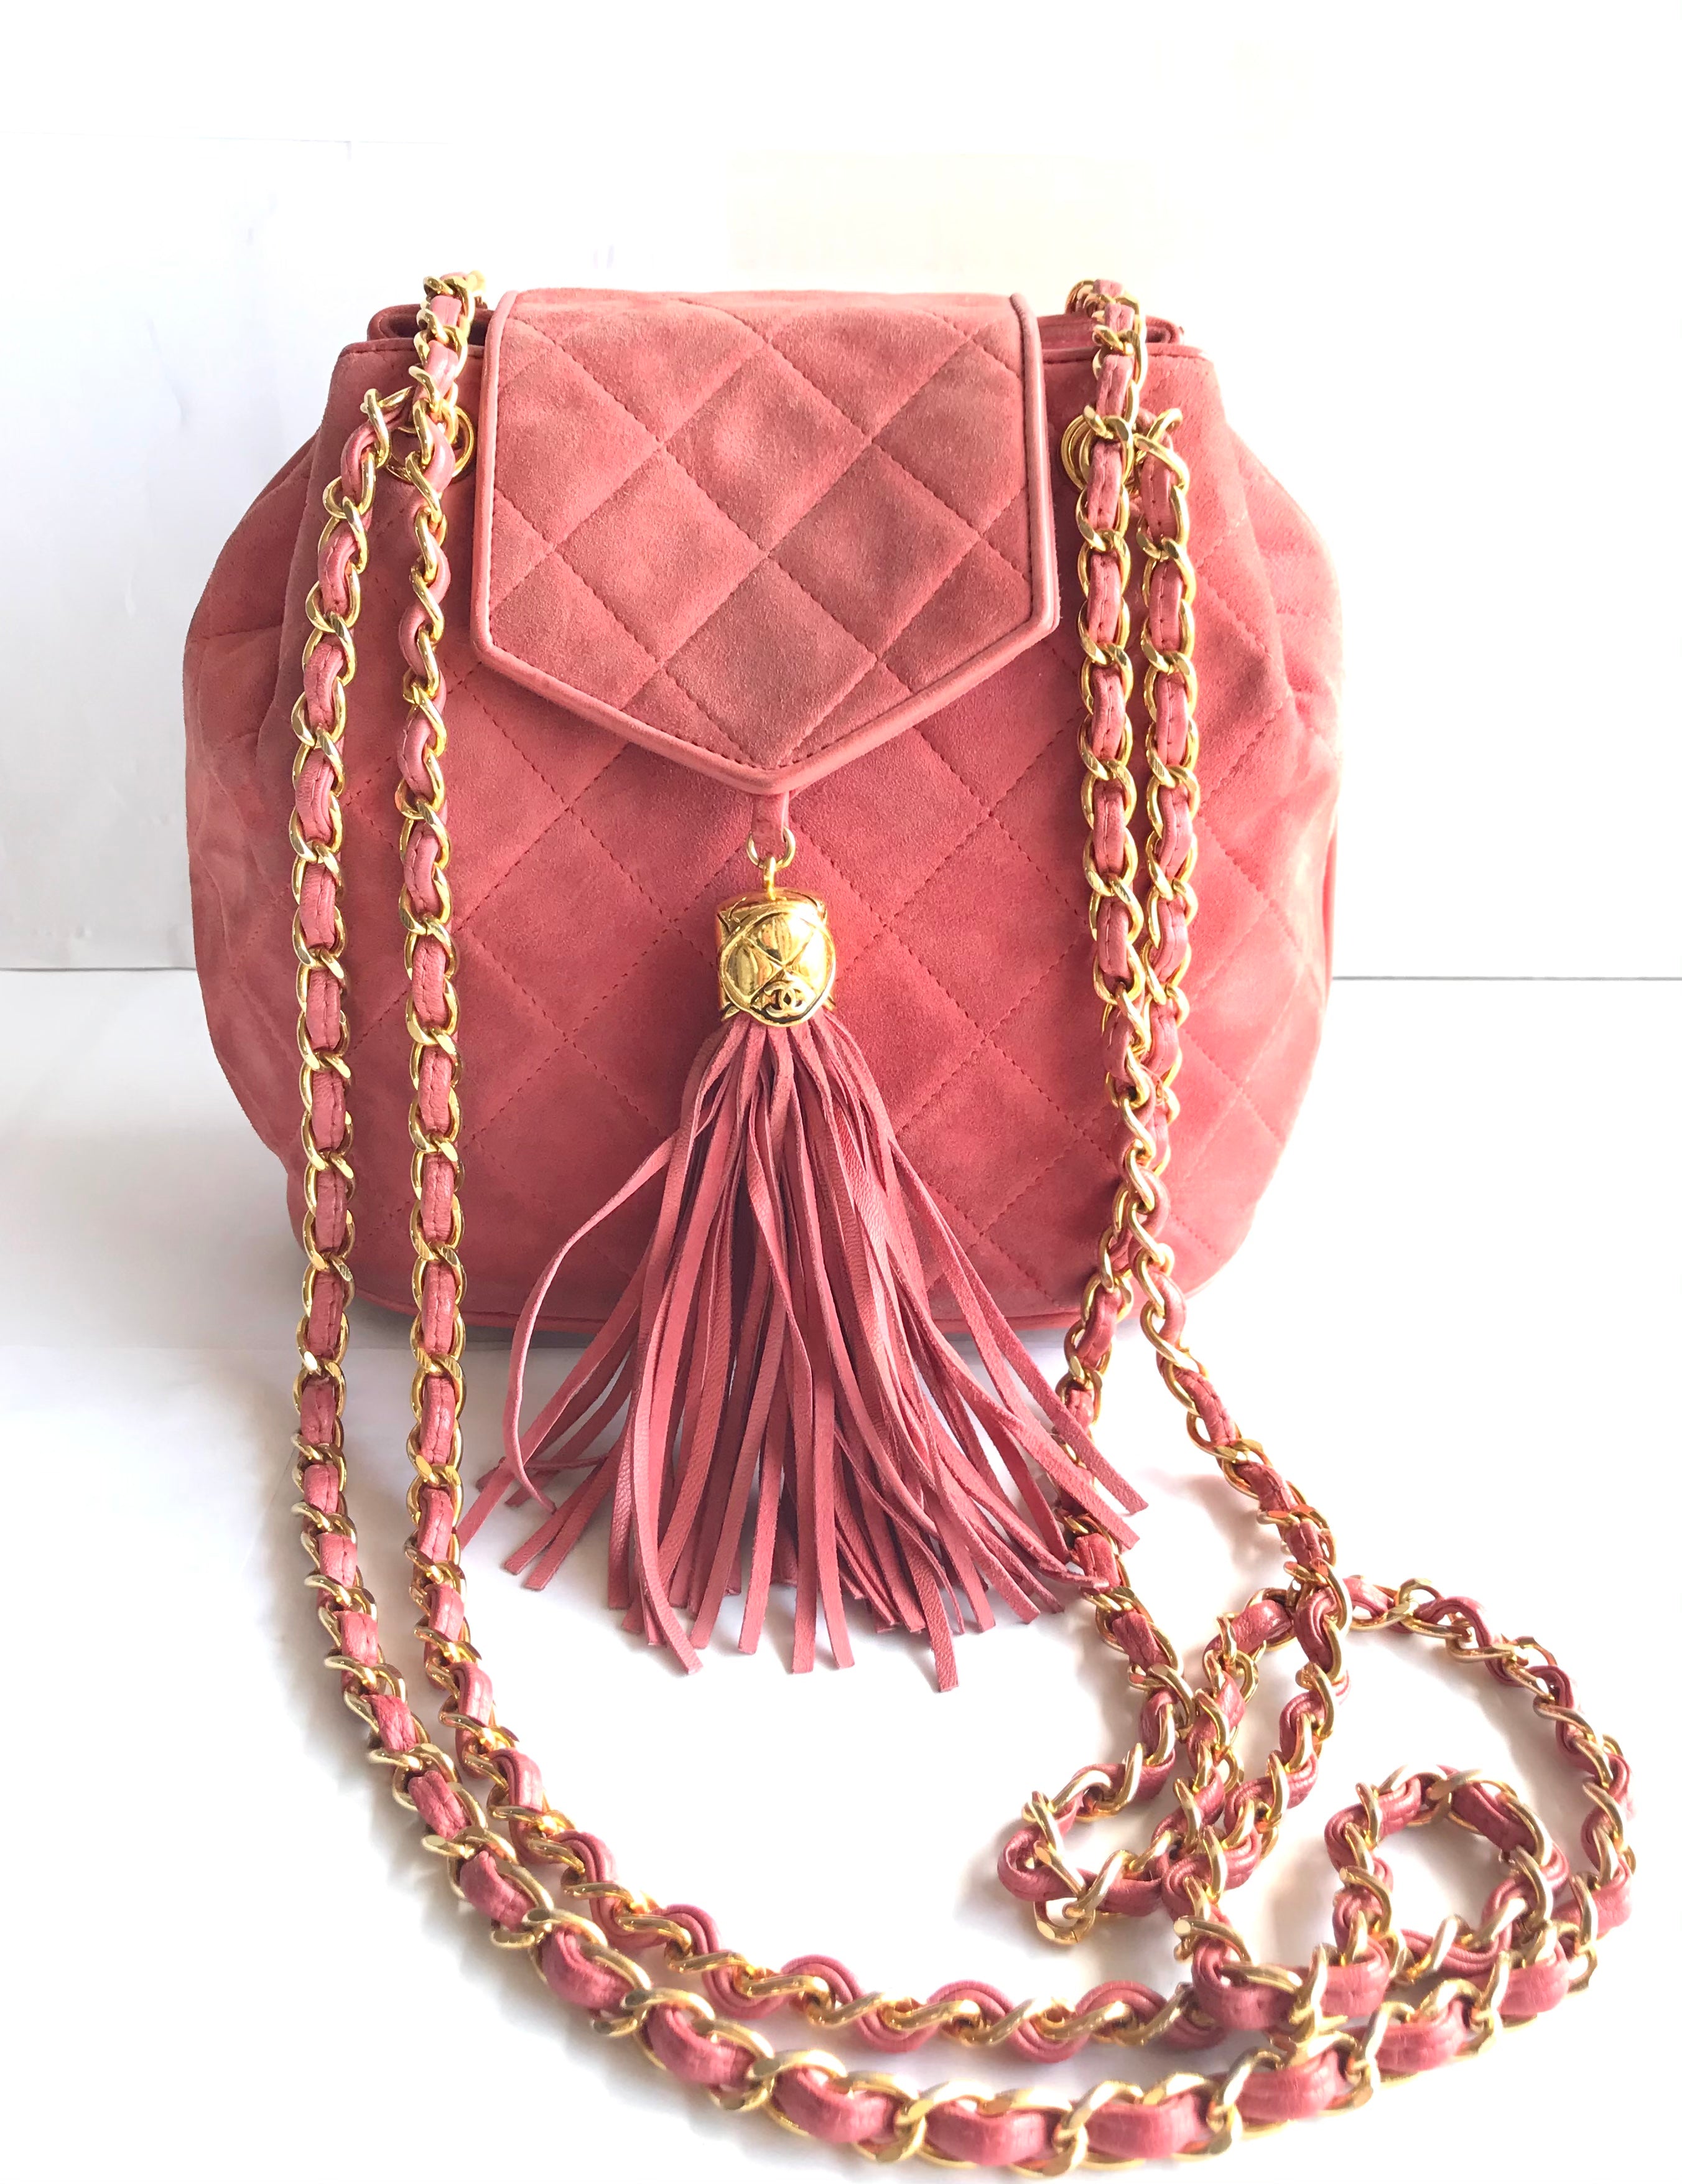 Vintage CHANEL pink suede leather chain shoulder bag with CC mark